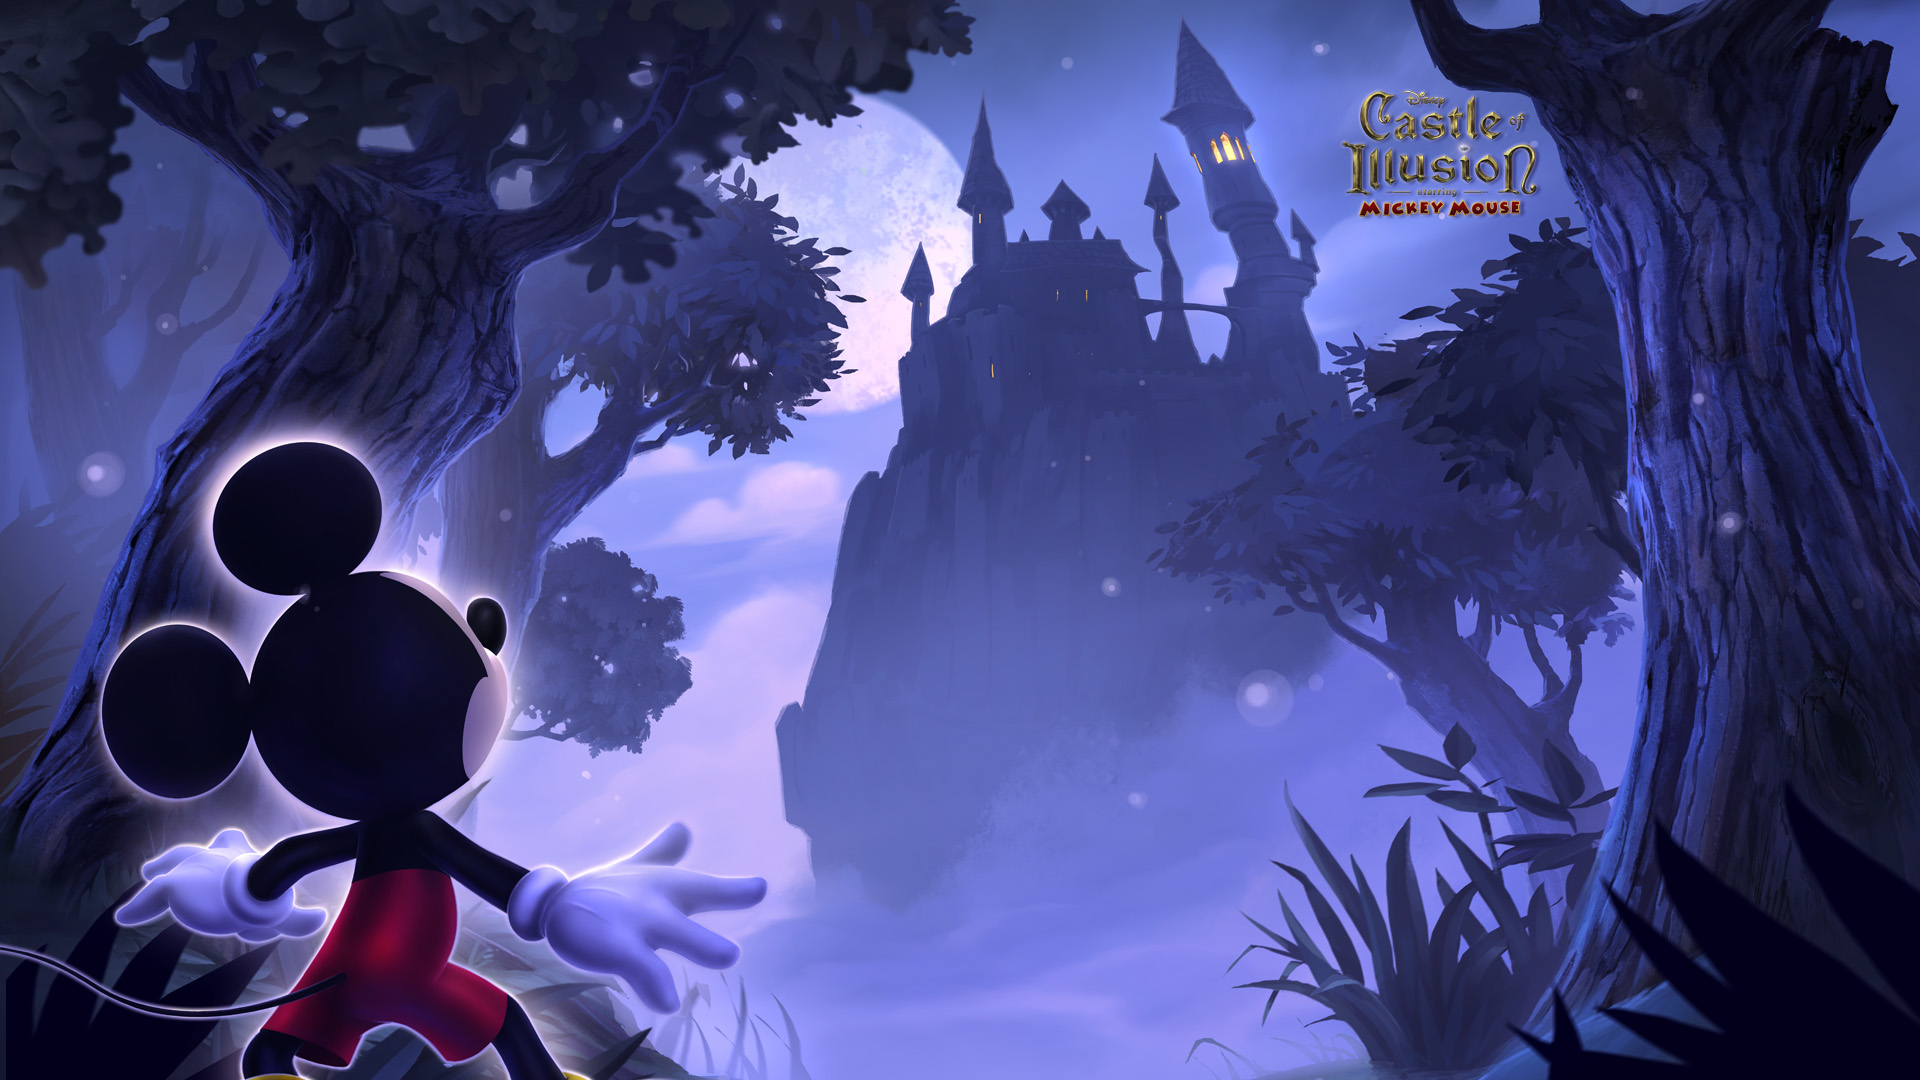 Let’s Play Castle of Illusion Starring Mickey Mouse